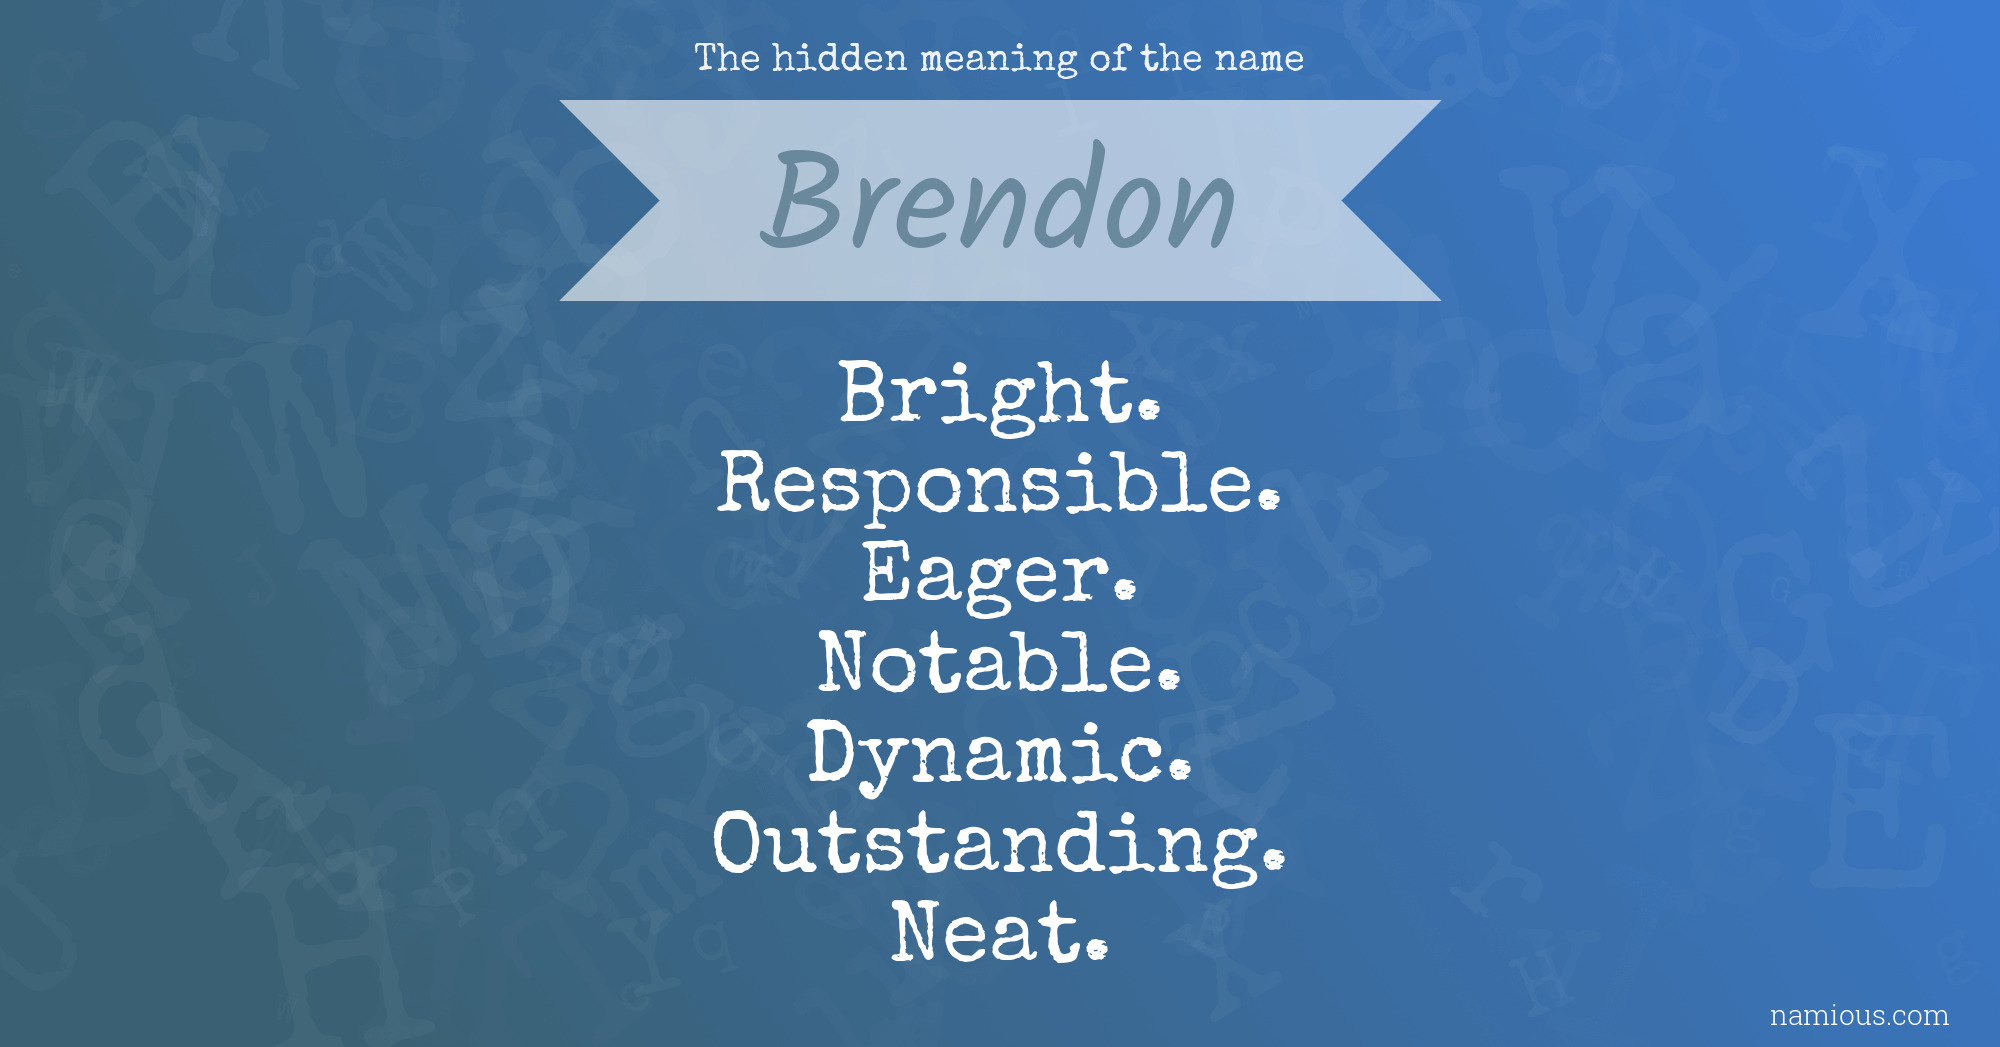 The hidden meaning of the name Brendon